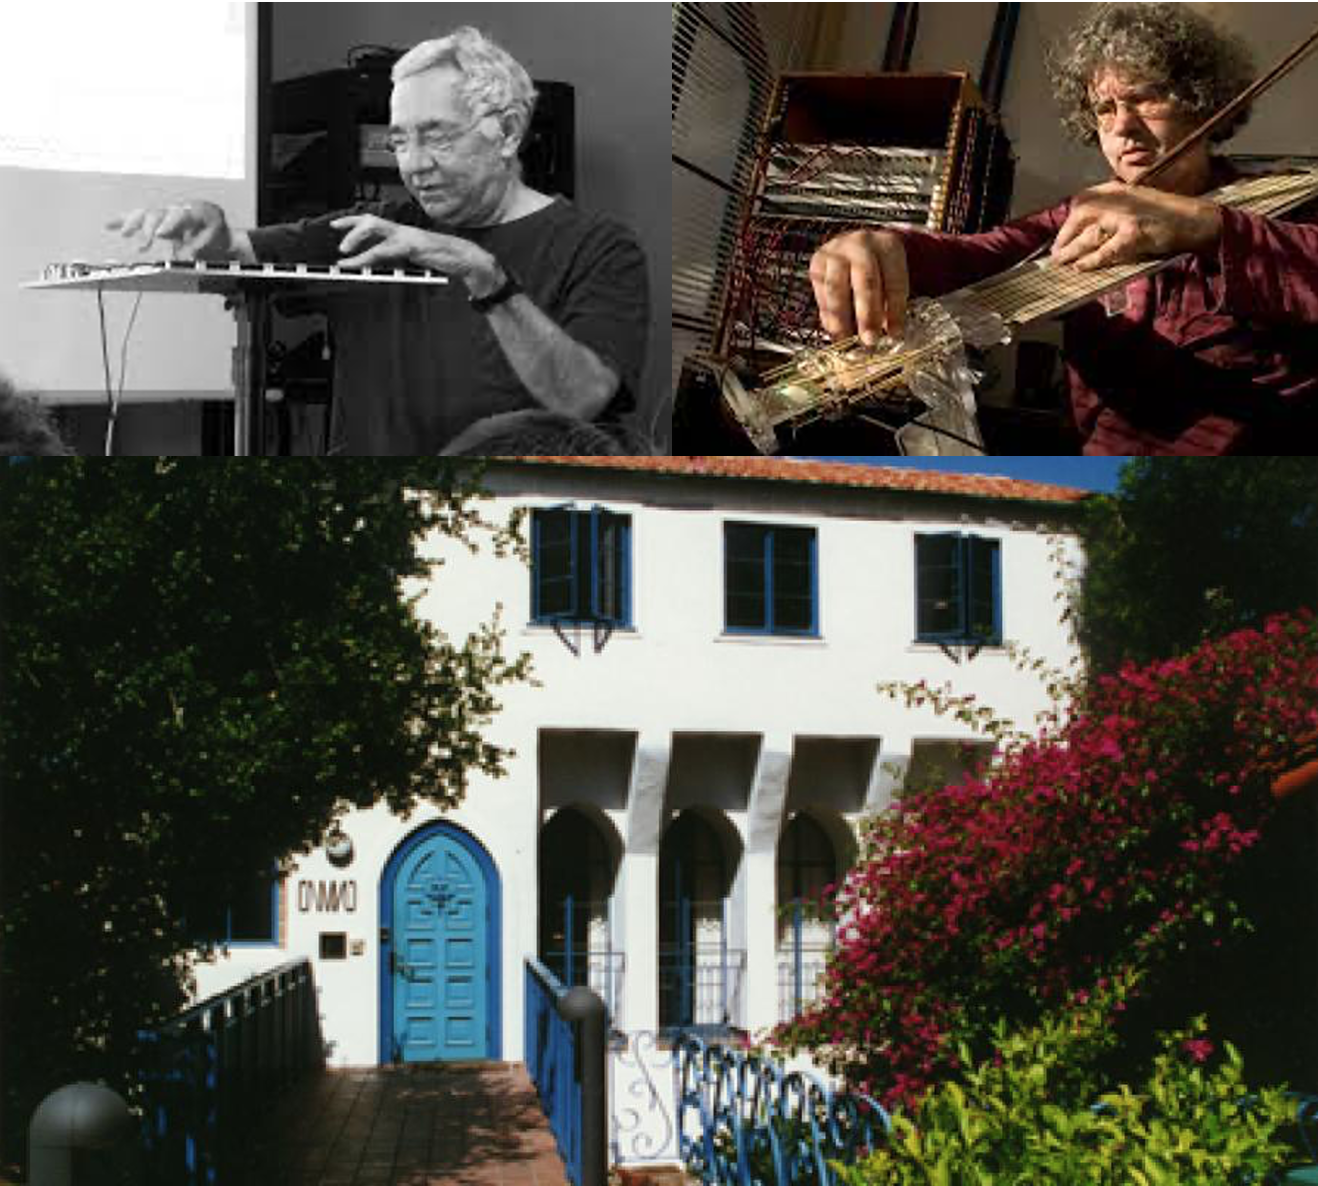 David Wessel (top left), Adrian Freed (top right), UC Berkeley’s Center for New Music and Audio Technologies (CNMAT)